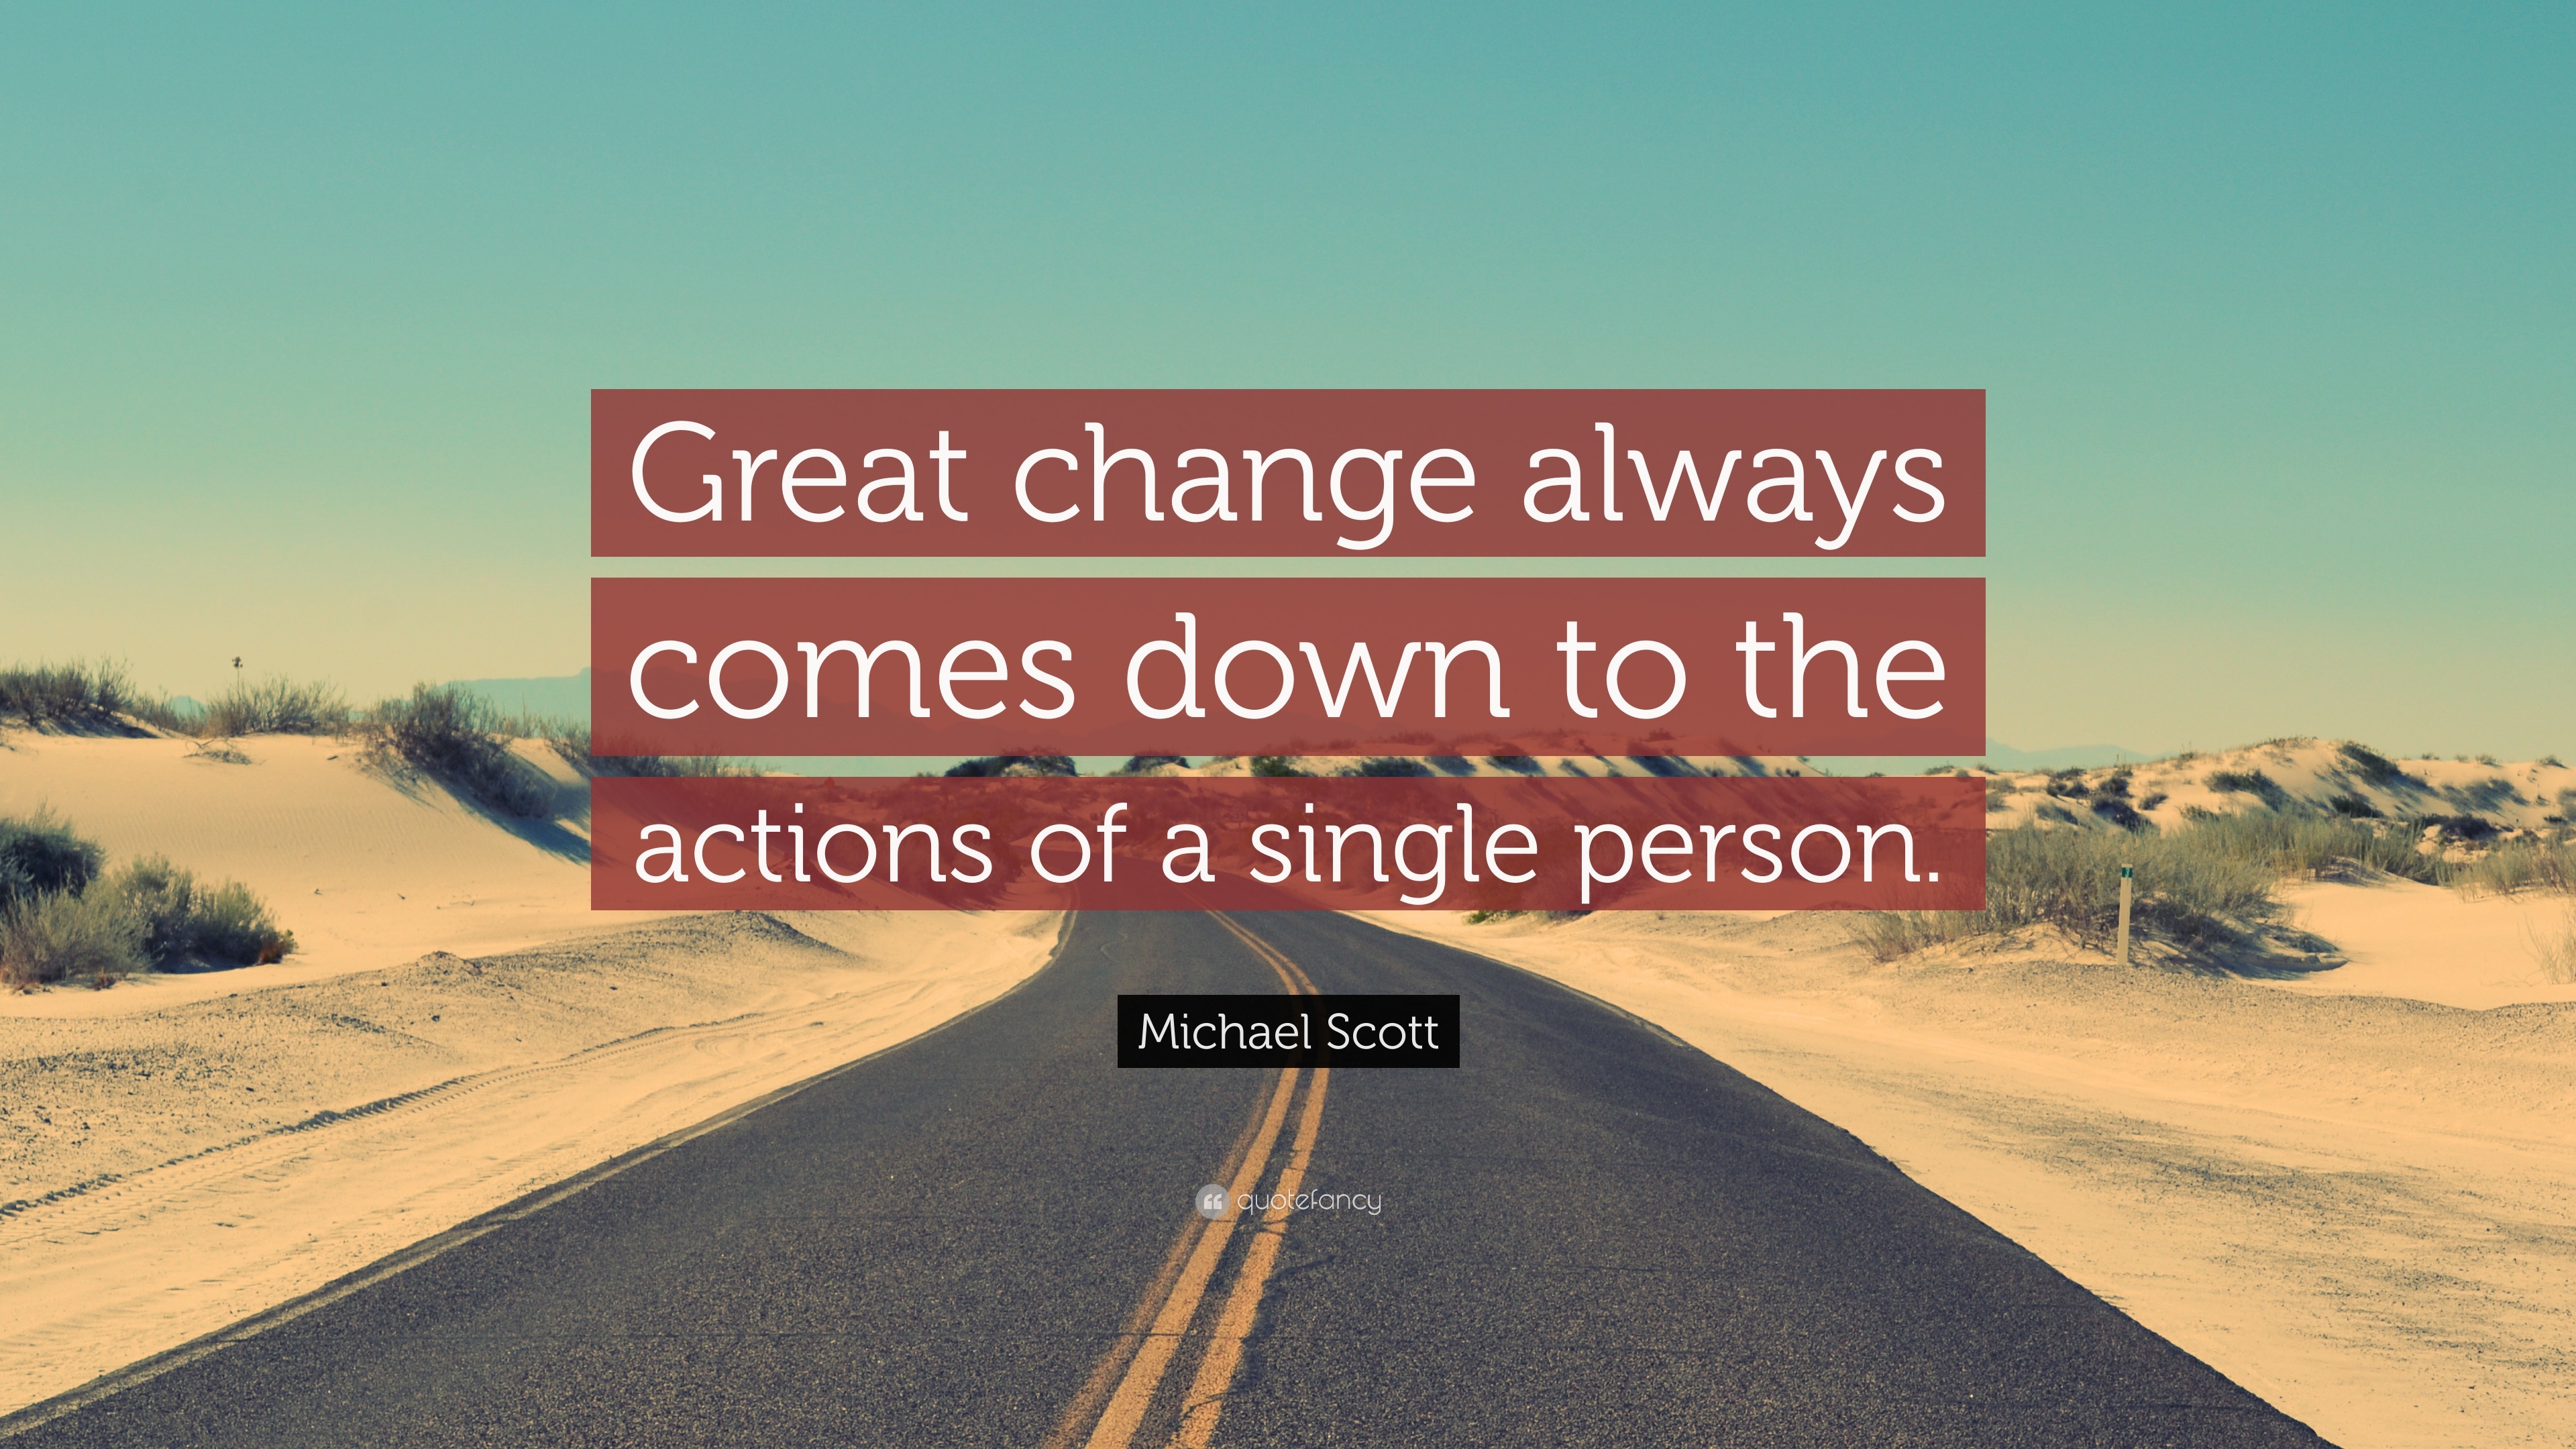 Michael Scott Quote: “Great change always comes down to the actions of